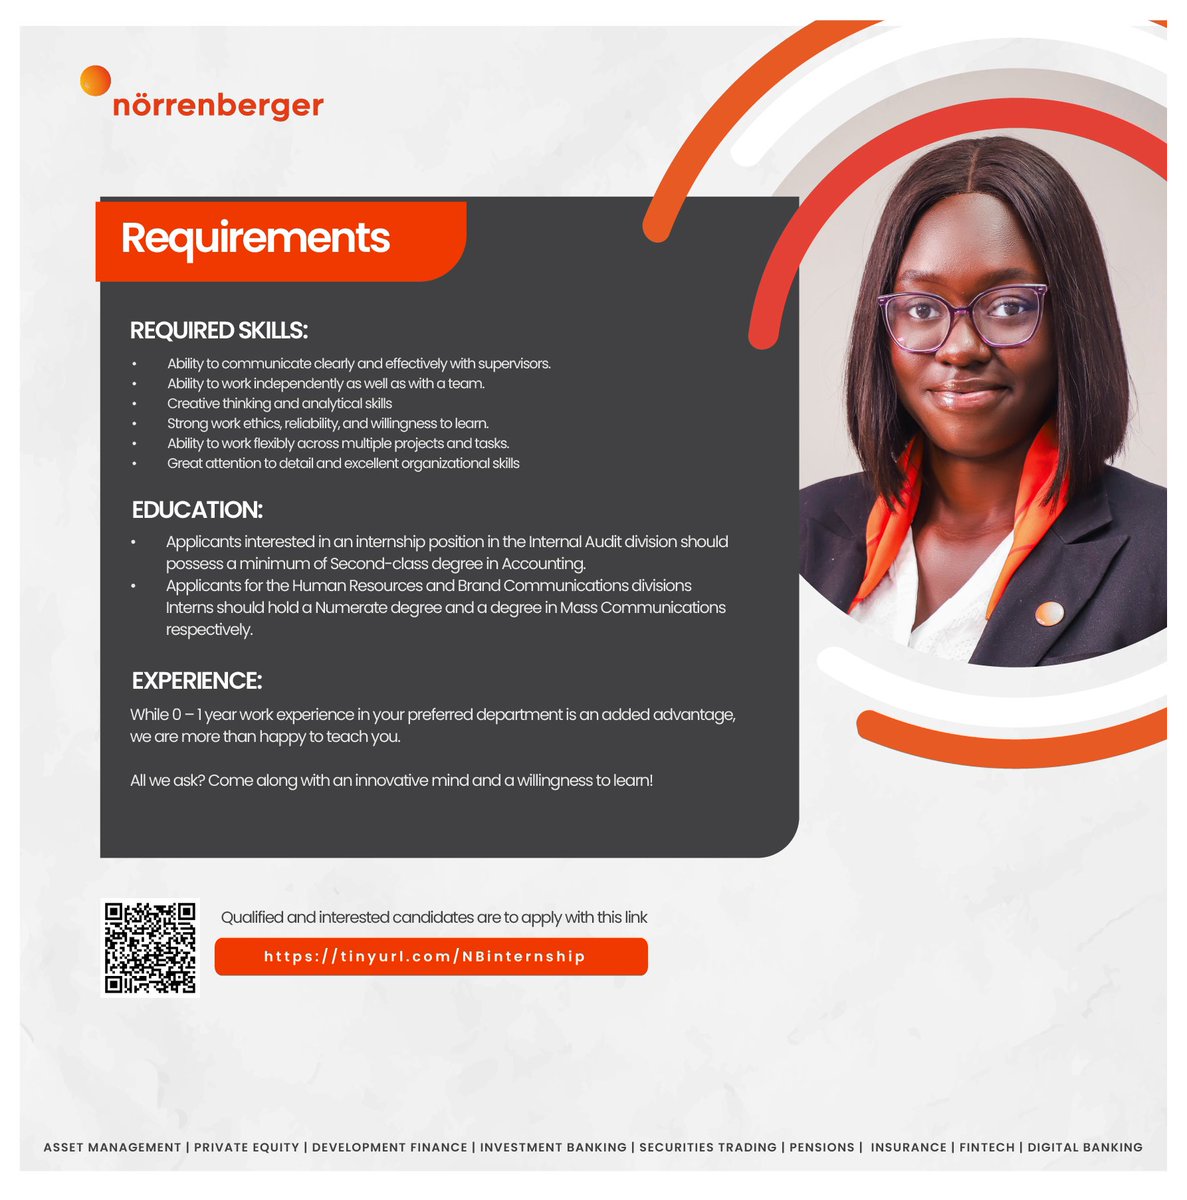 Hello Corper .

Ready to take flight ✈️ on your career?

Then this is an opportunity for you. Calling all stream I and II , Batch A Corps Members to apply for this internship.

Send your CV or resumes by clicking on the link - norrenberger.seamlesshiring.com/h/advanced#/jo…

#Intern #JobAD